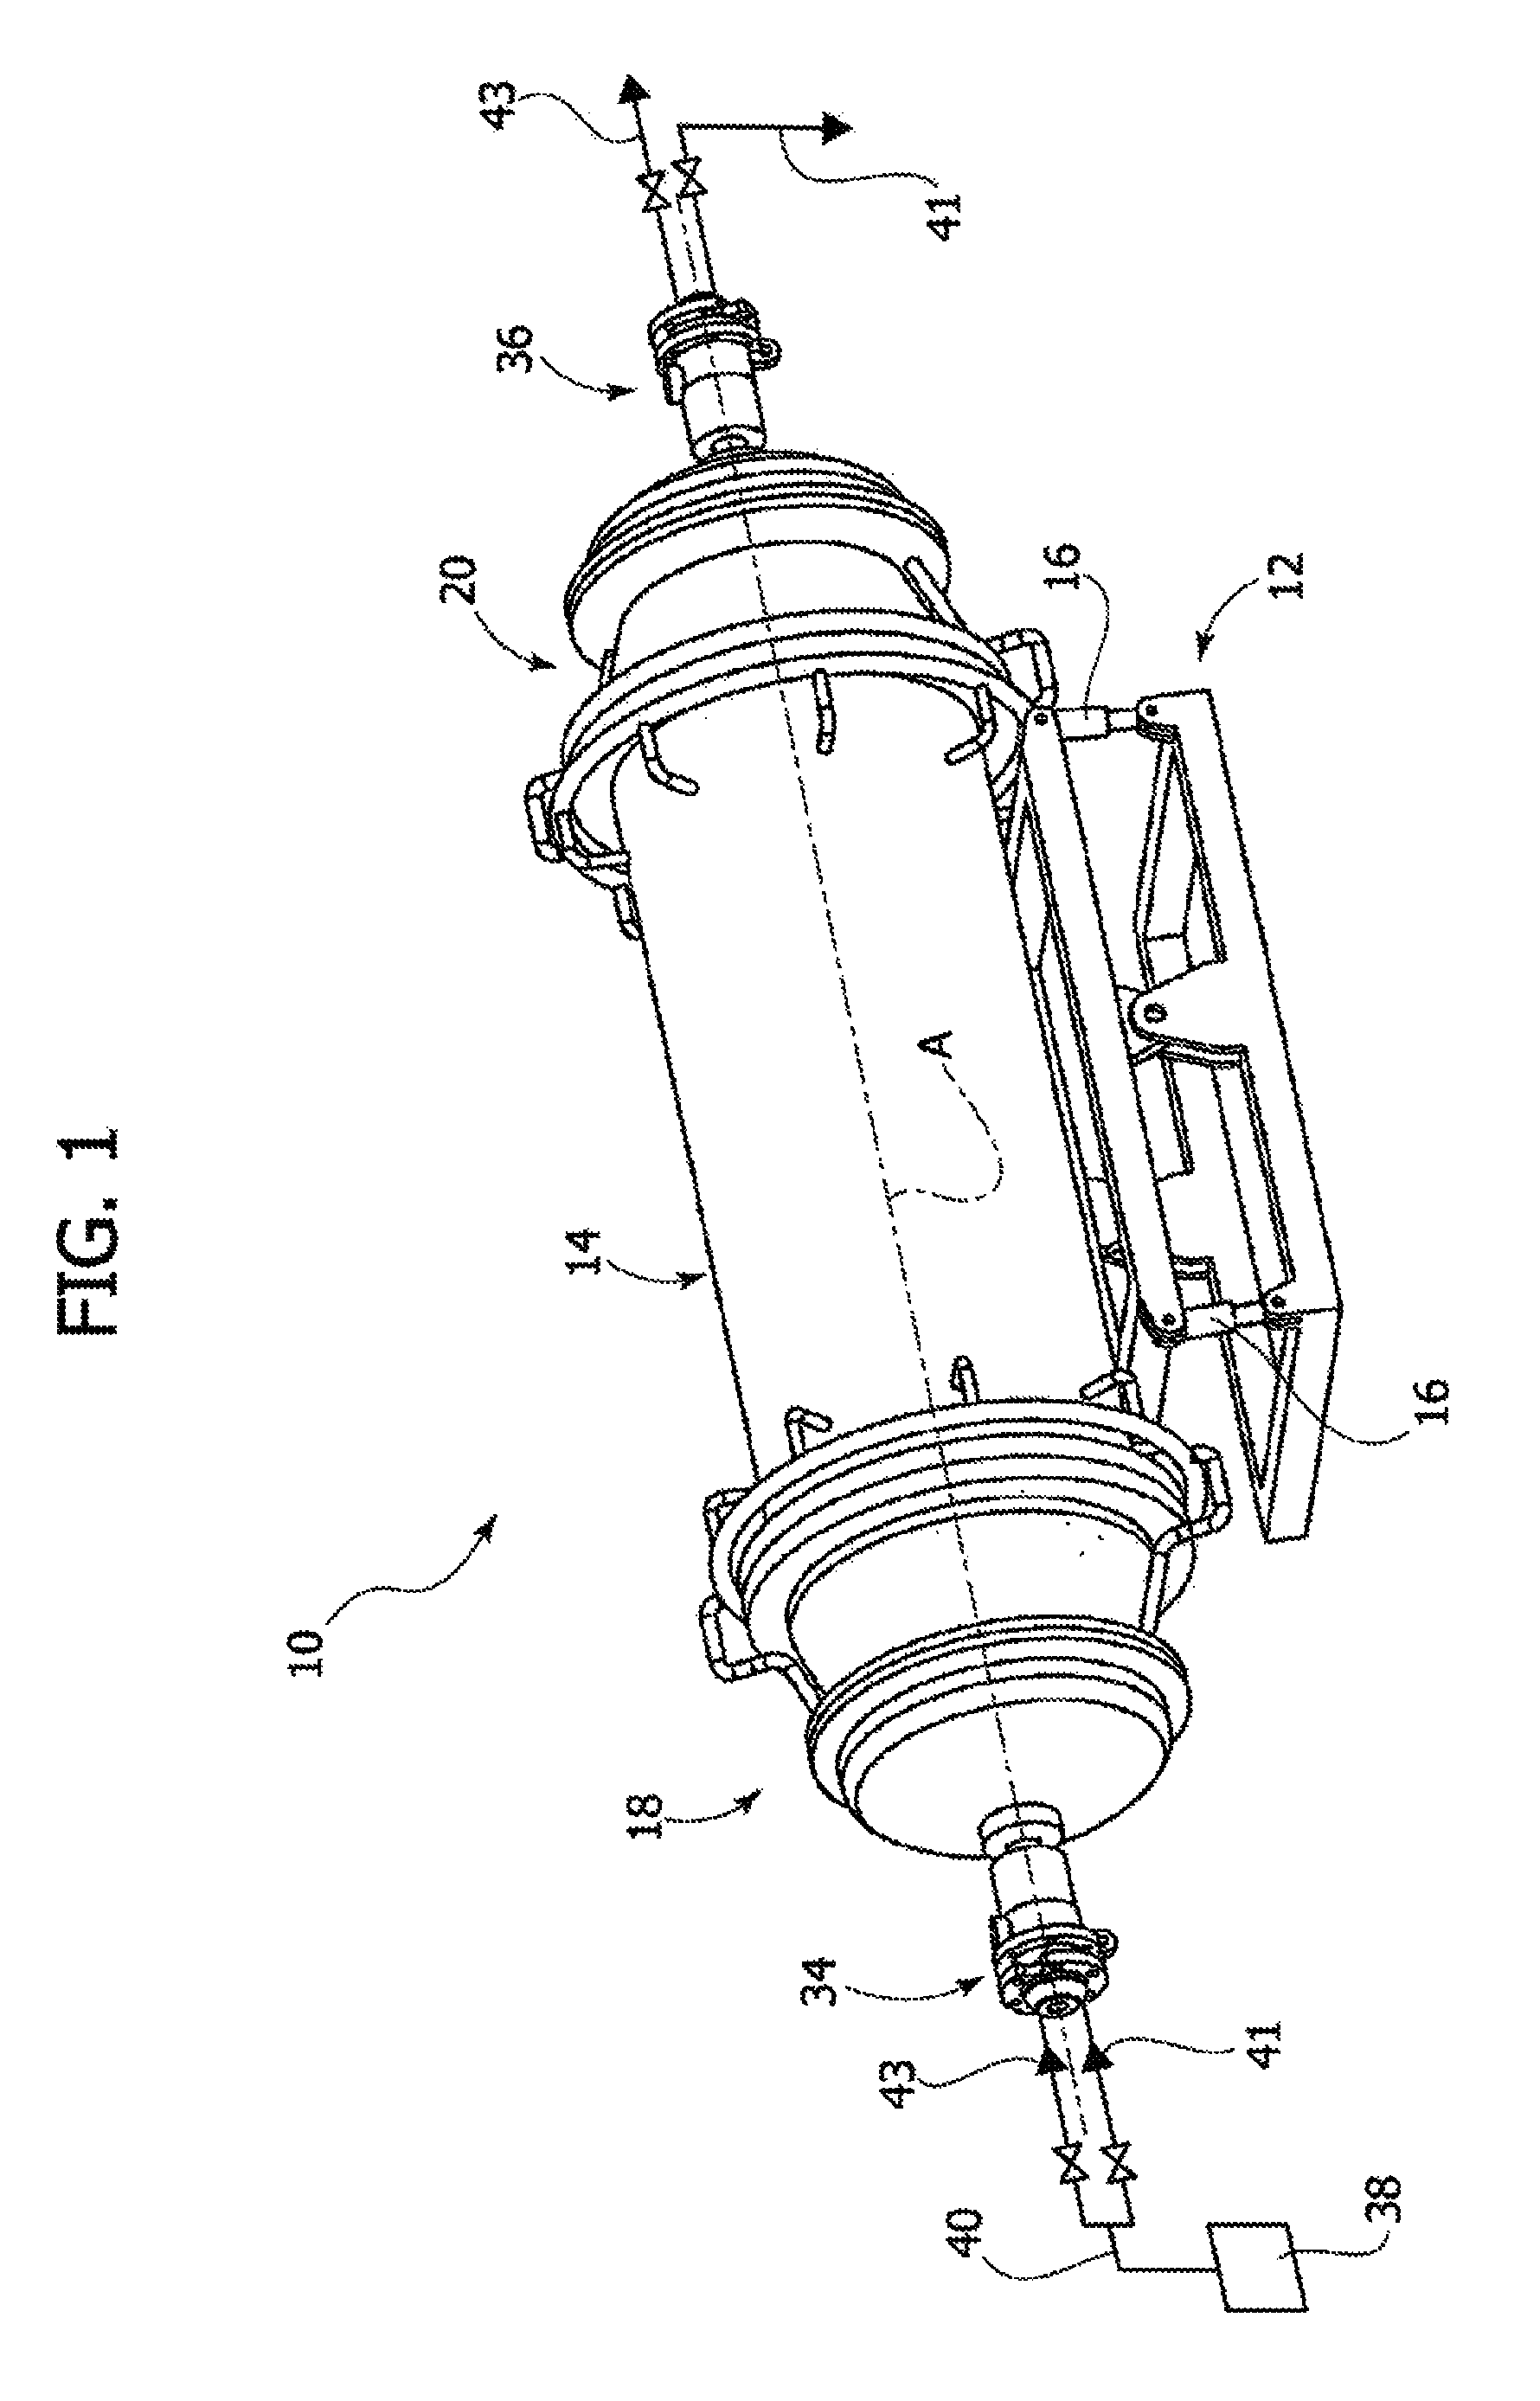 Apparatus and process for recycling absorbent sanitary products